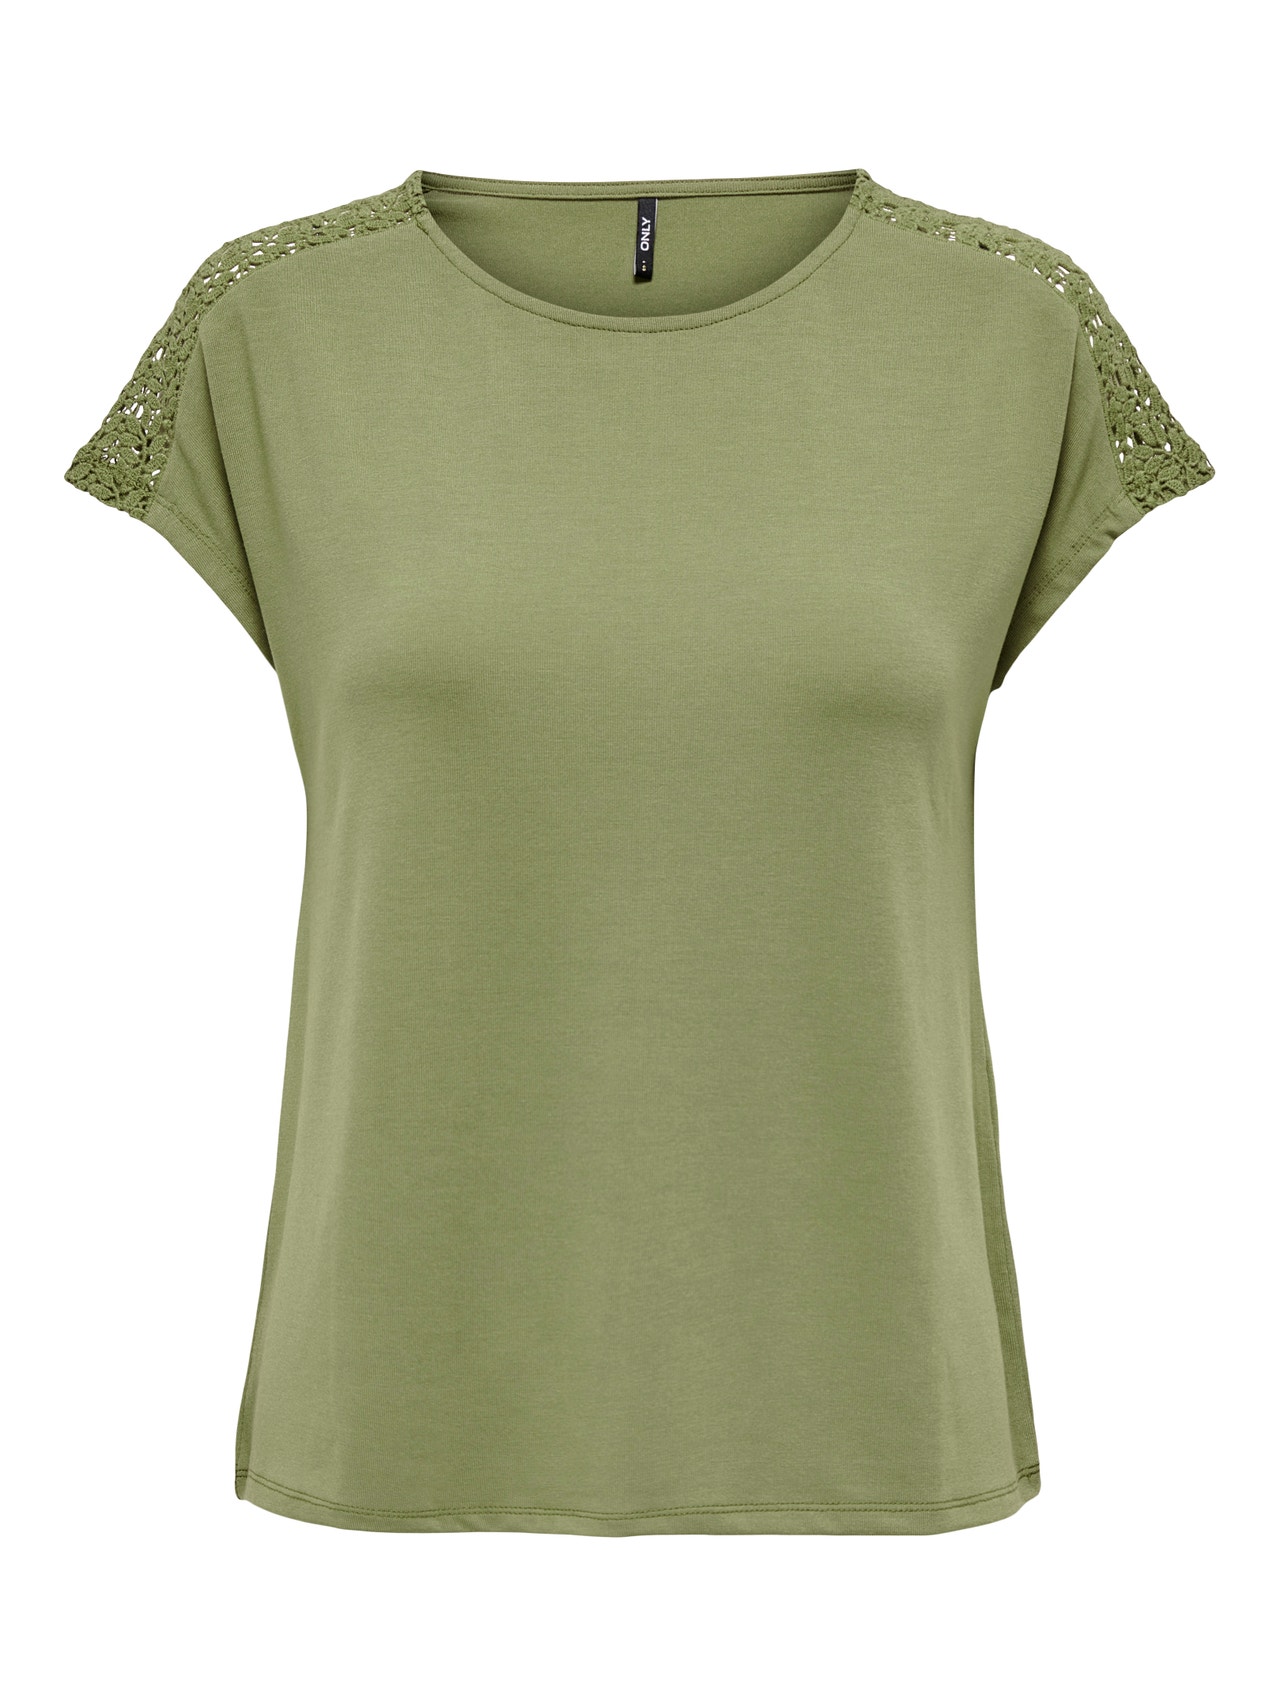 ONLY Regular Fit O-hals Topp -Martini Olive - 15289589